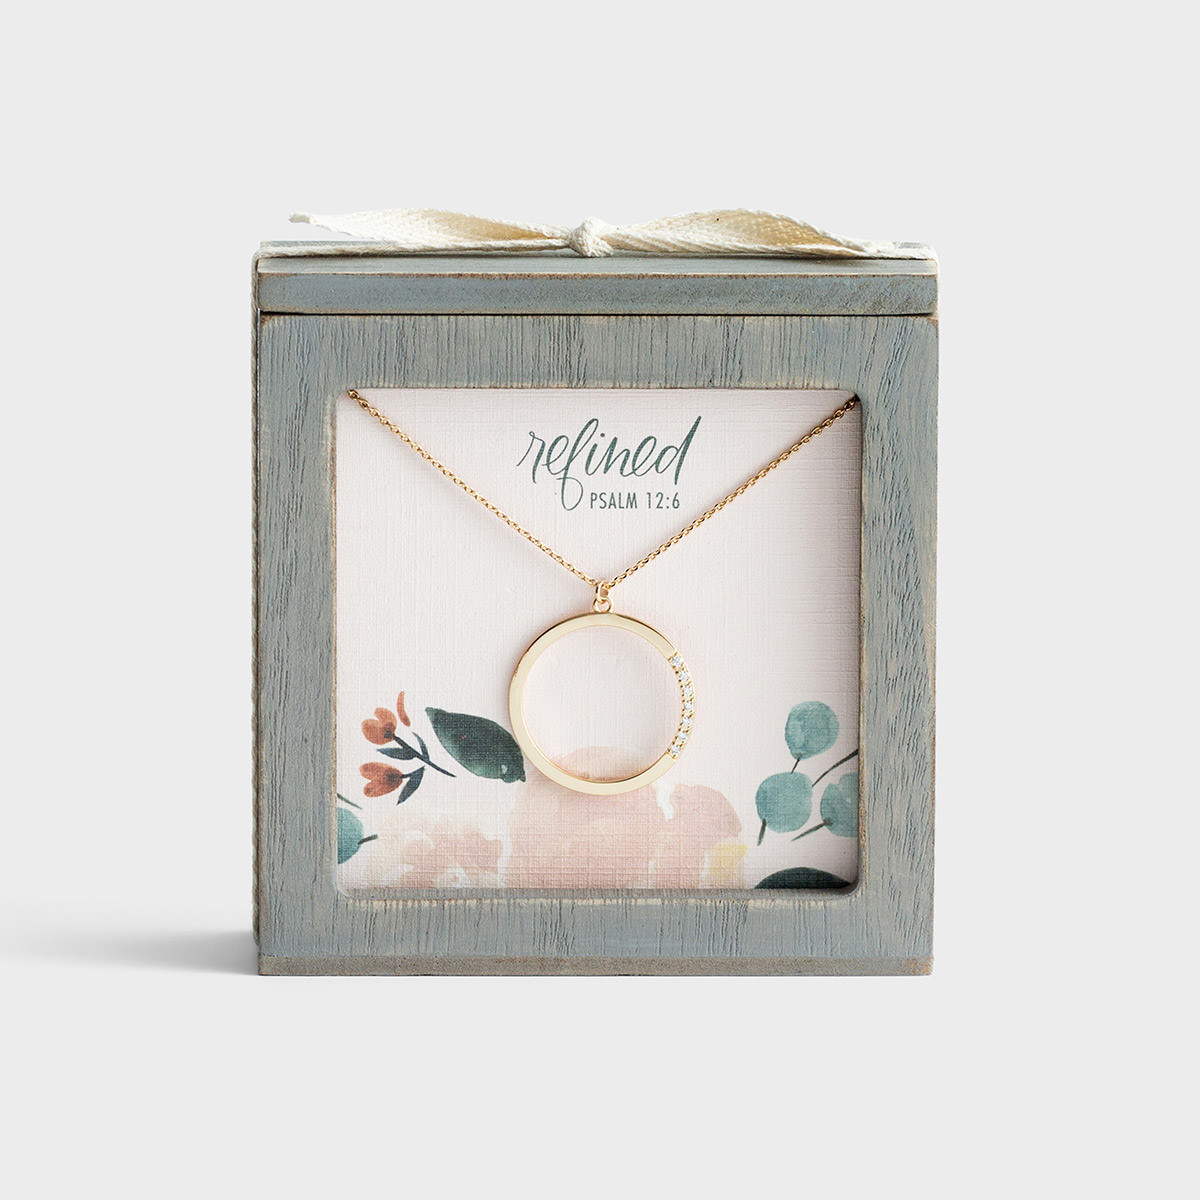 Refined - Necklace and Promise Box Gift Set